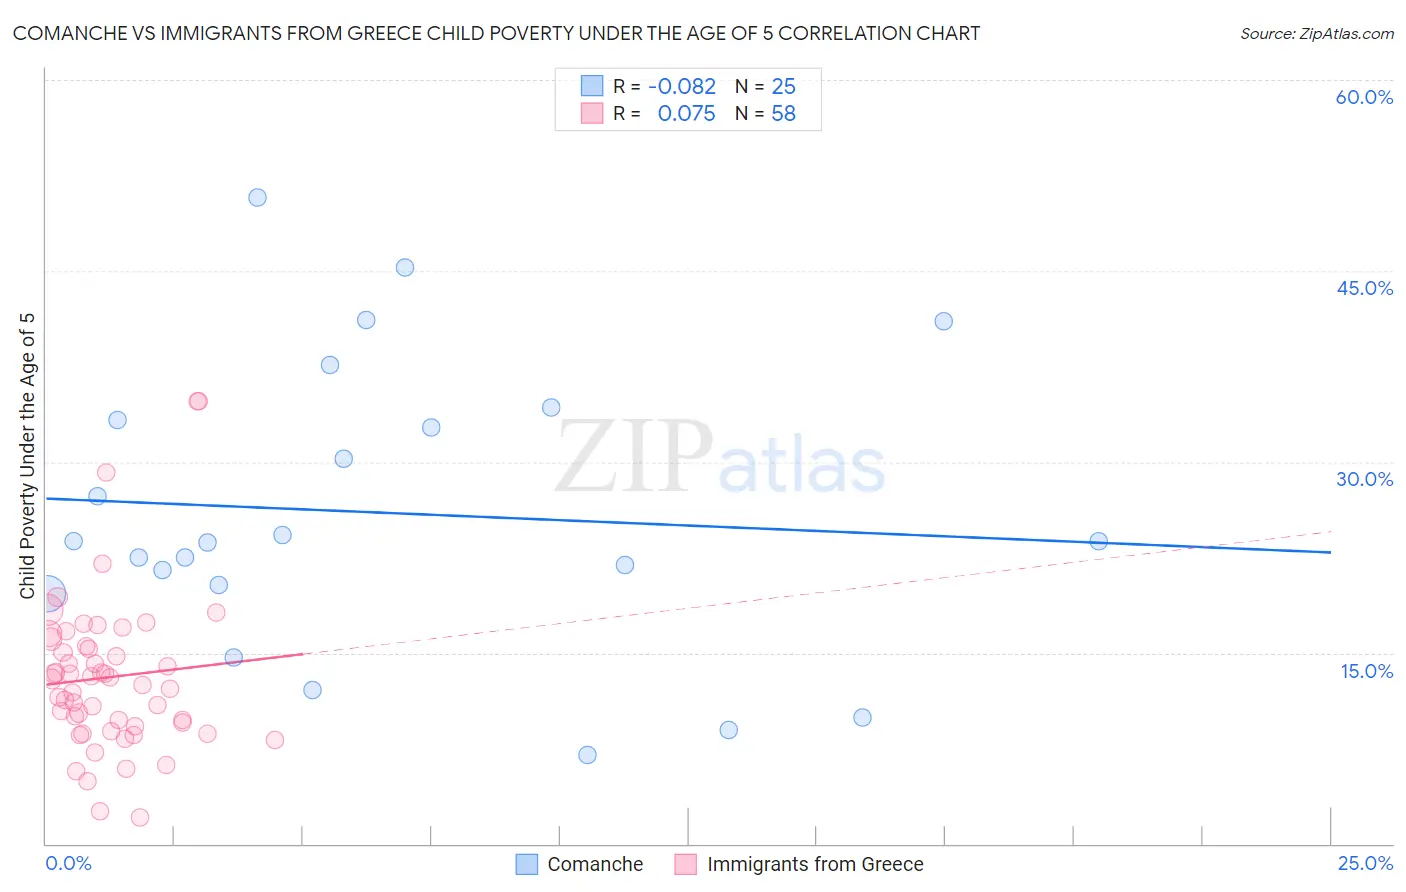 Comanche vs Immigrants from Greece Child Poverty Under the Age of 5